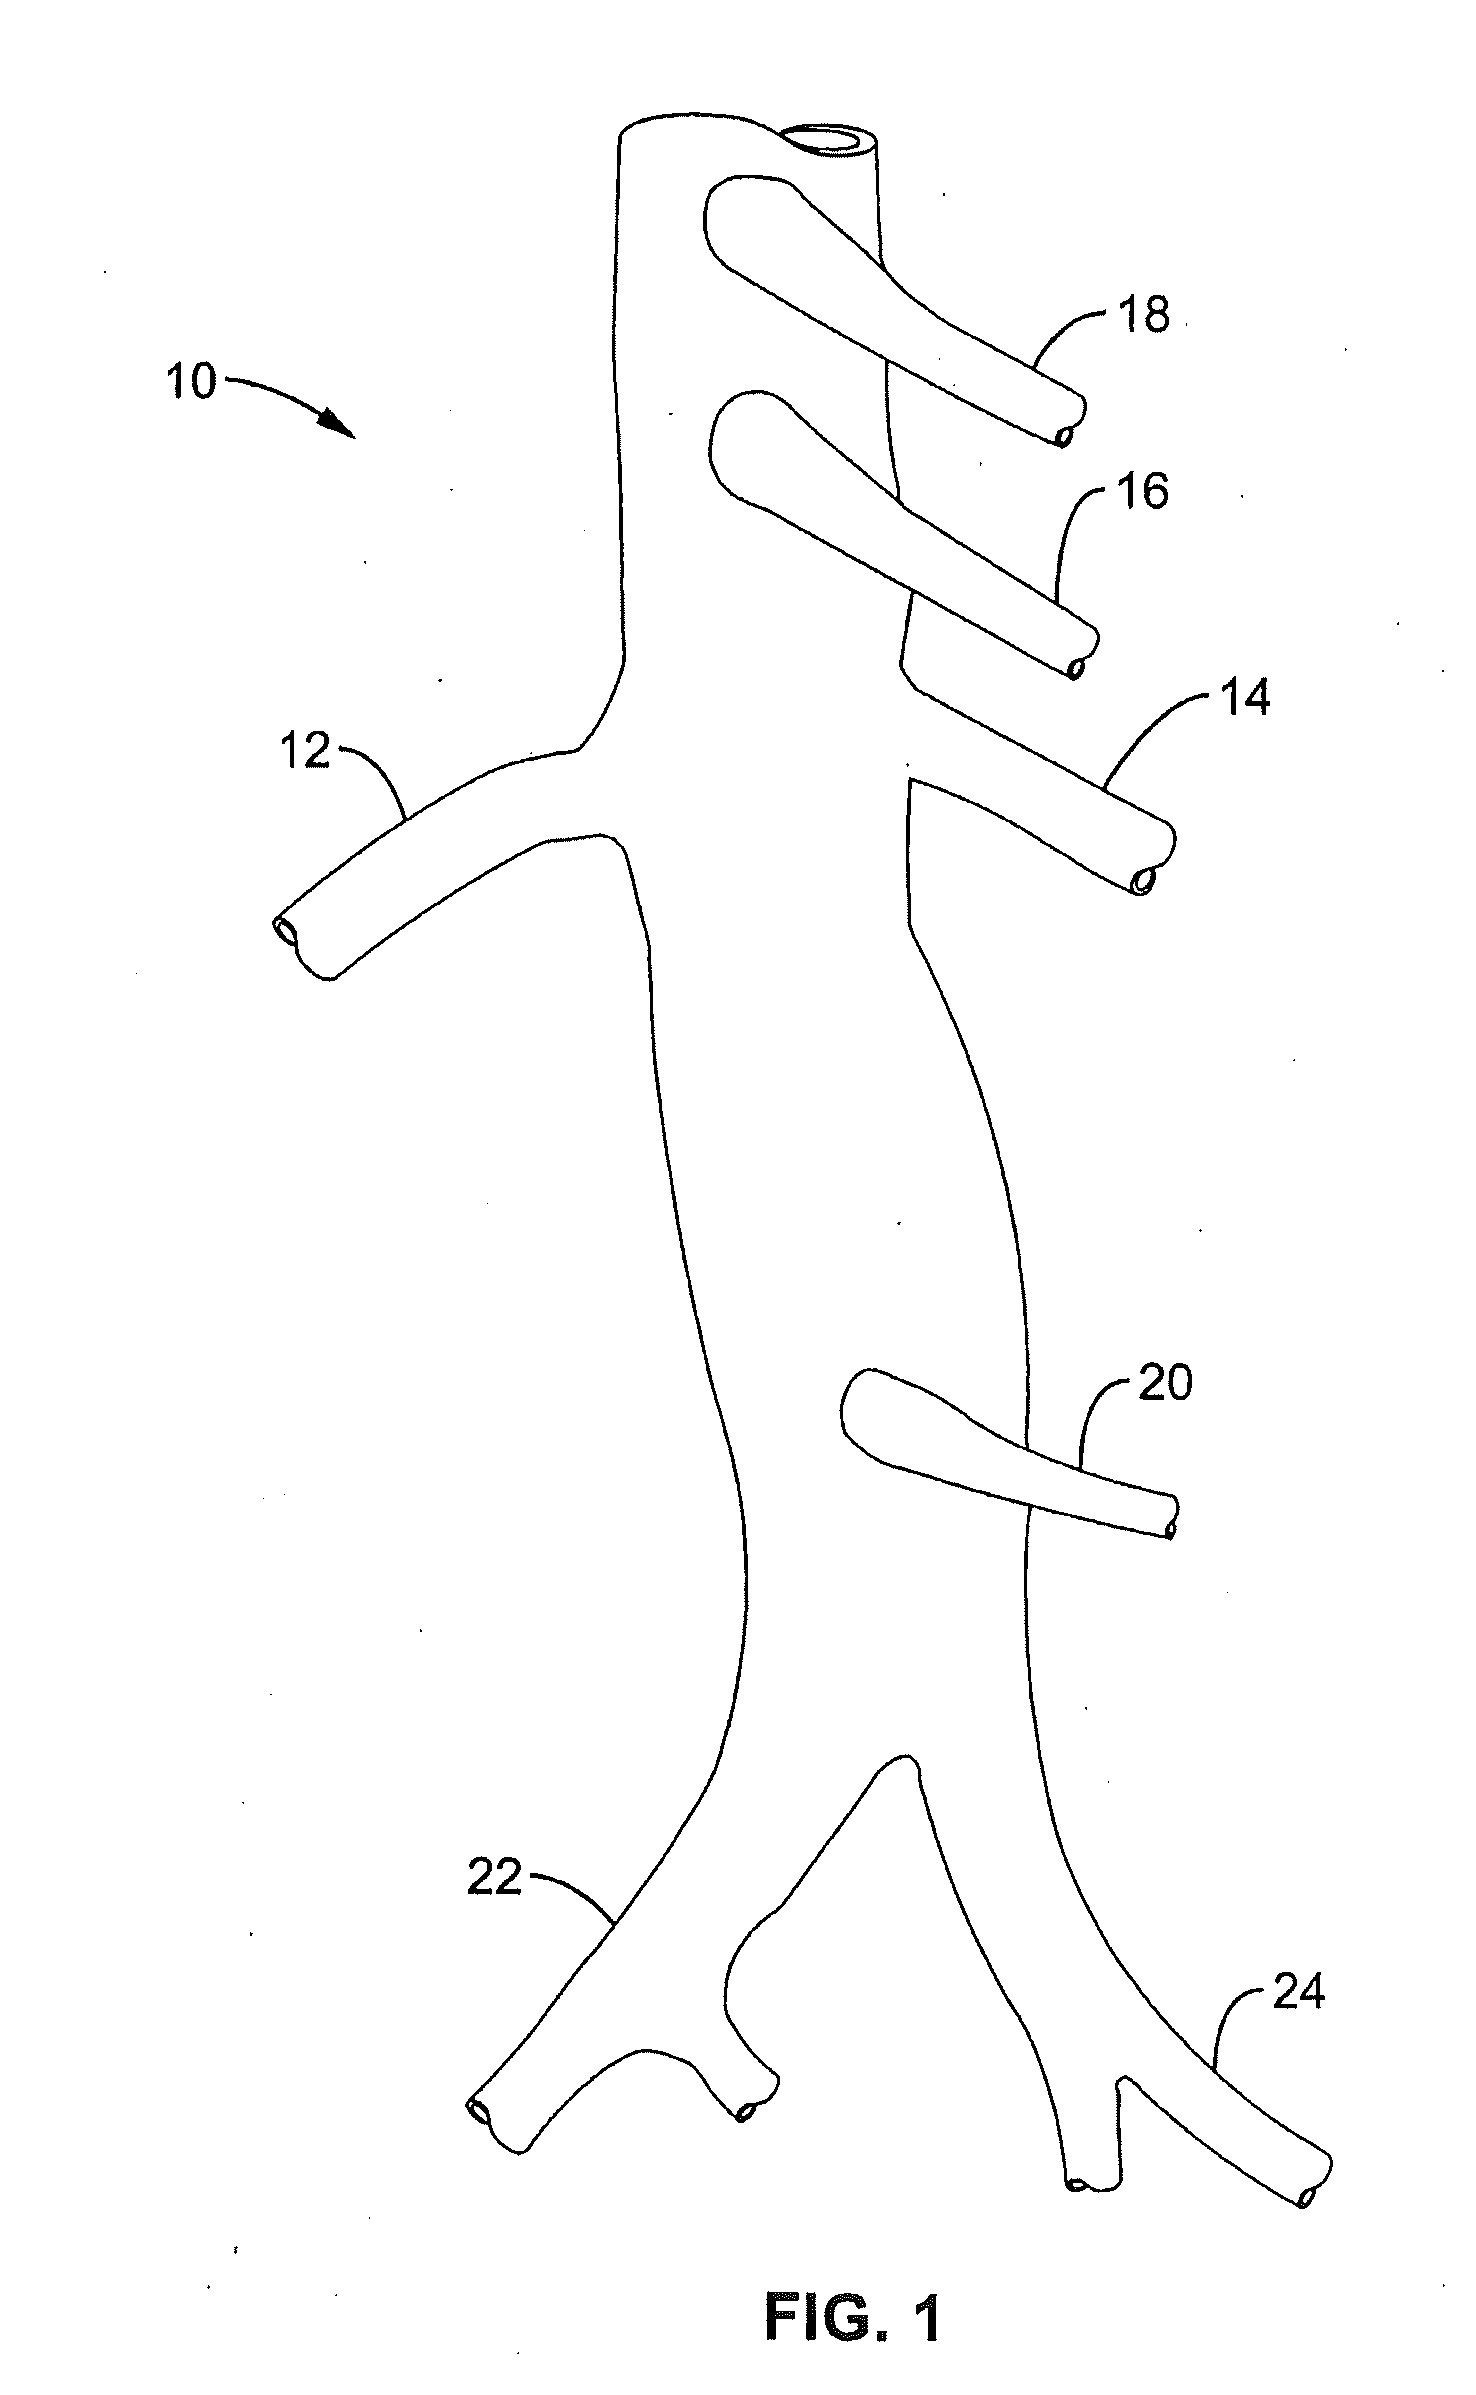 Method and Apparatus for Intra-Aortic Substance Delivery to a Branch Vessel